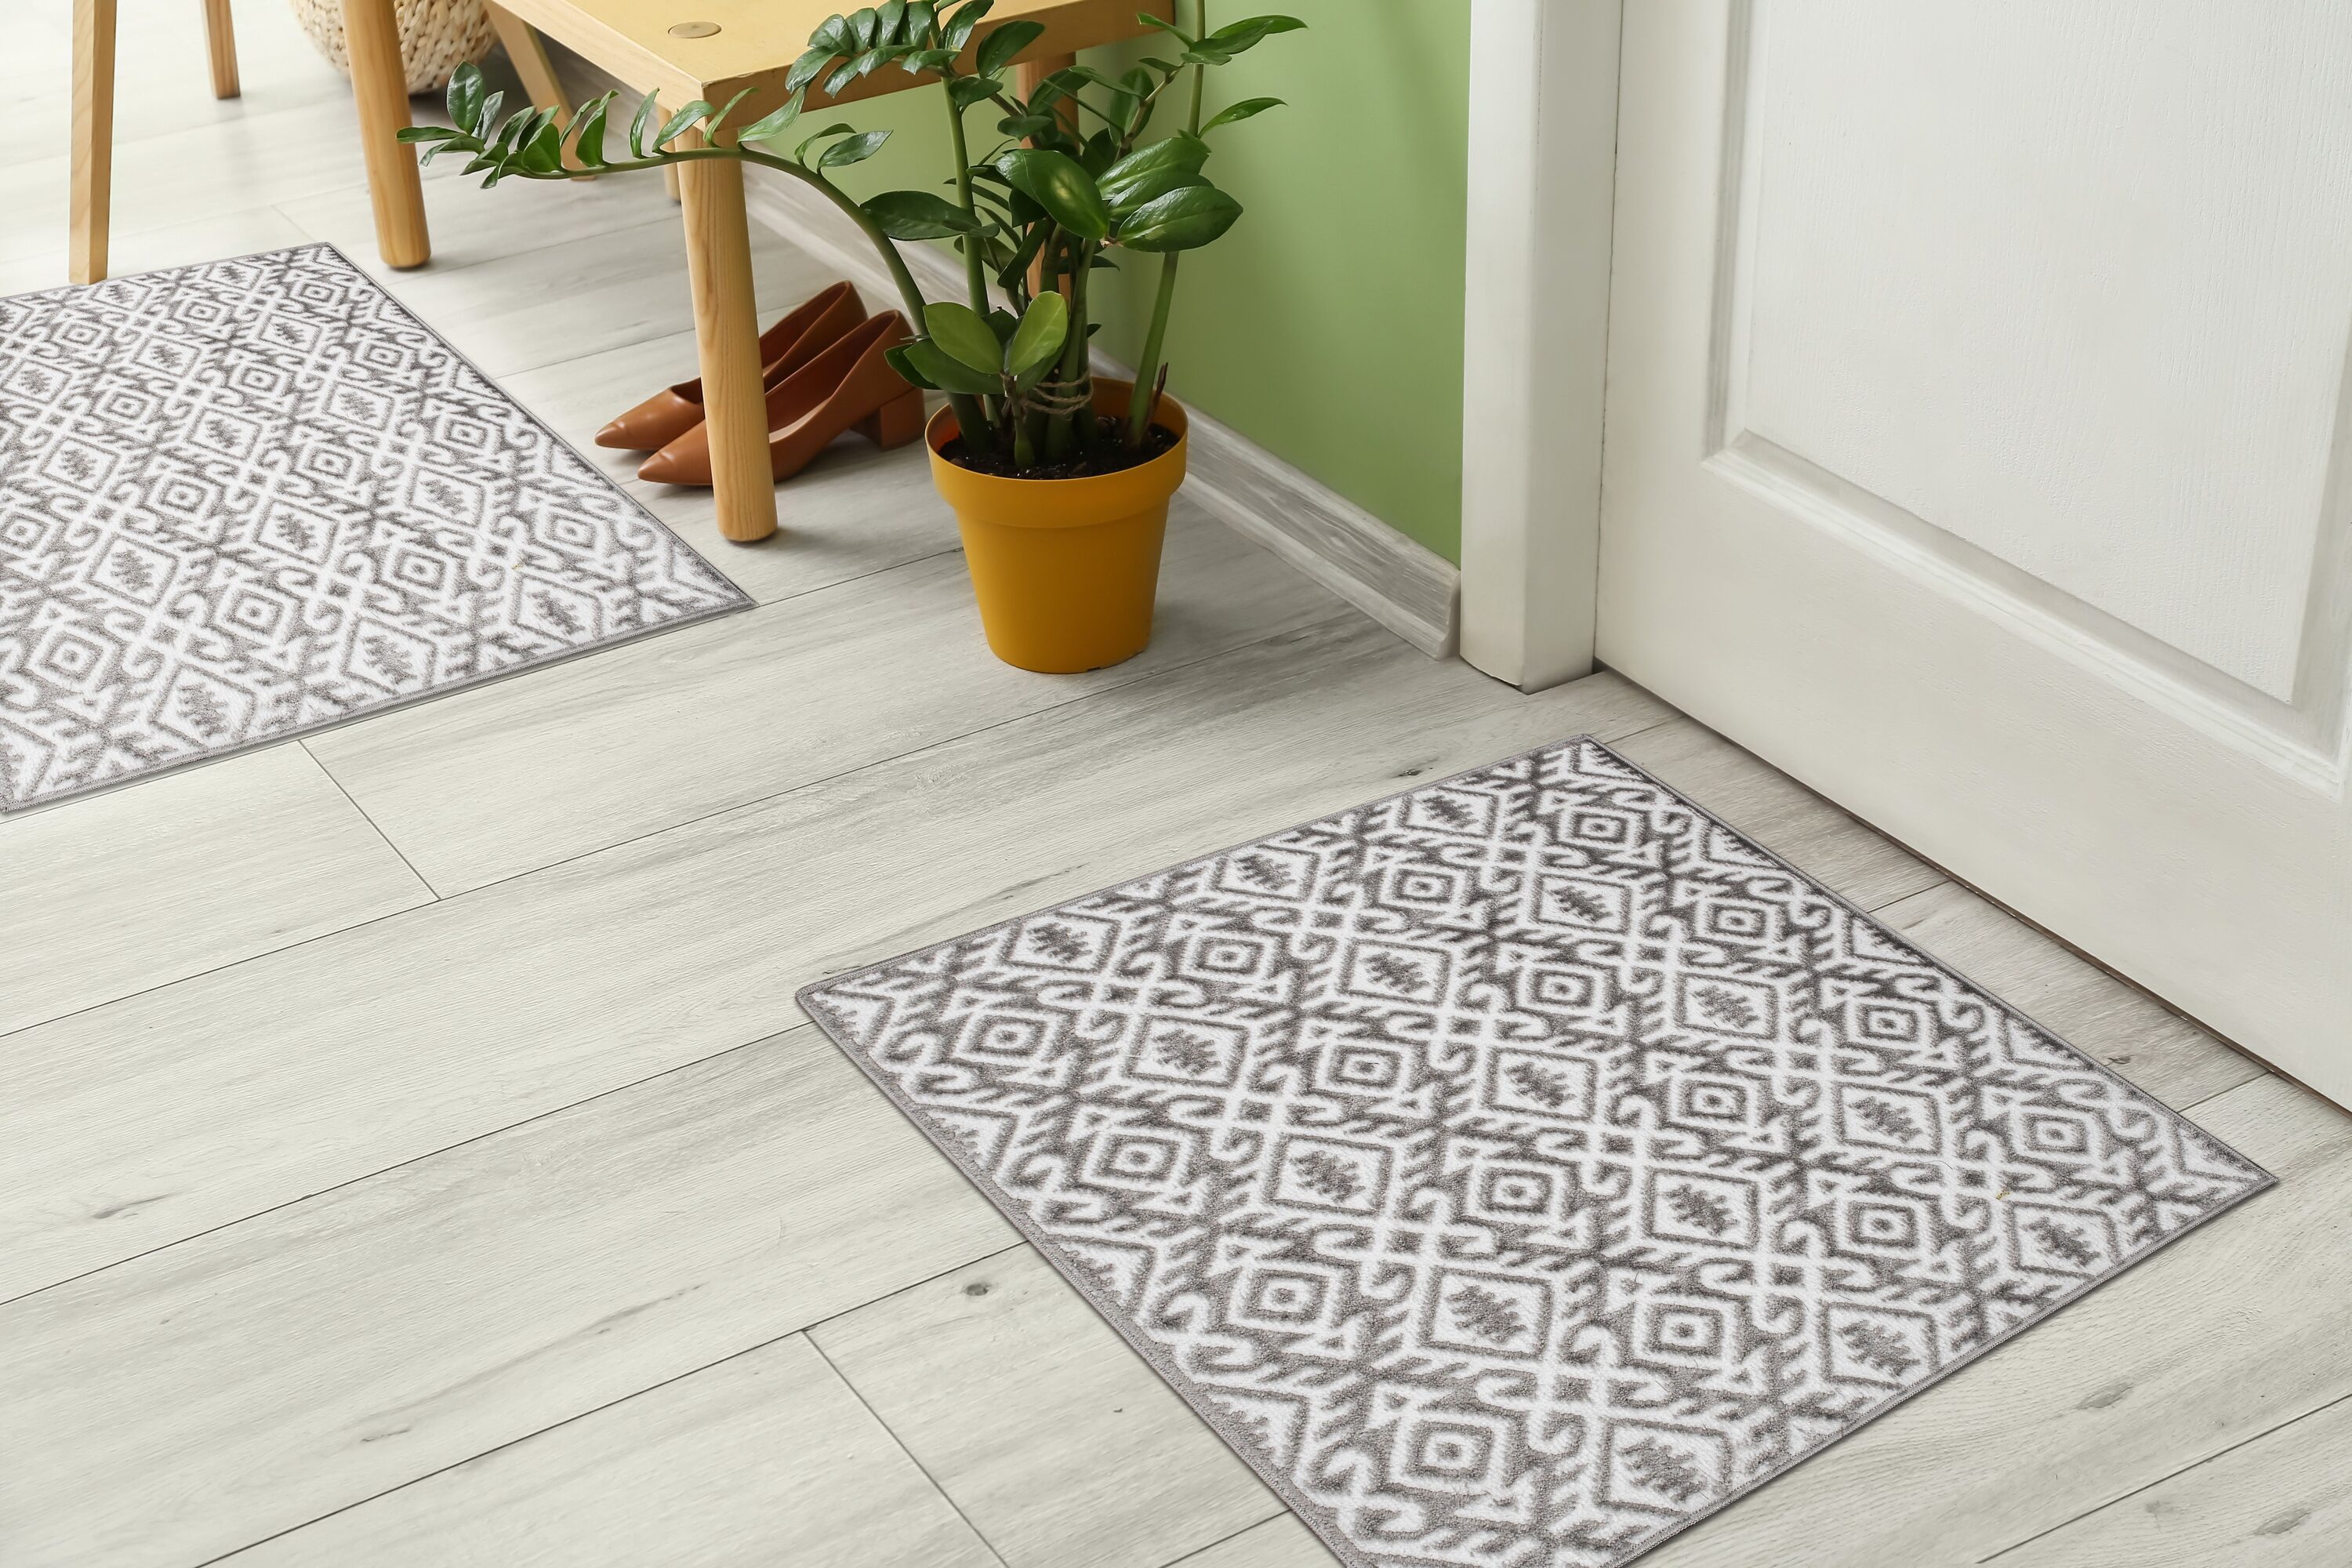 The Sofia Rugs White and Gray Geometric Bath Mat Set - 2 Piece Kitchen Rug  Set - Absorbent and Non-Slip - Polypropylene - Machine Washable in the  Bathroom Rugs & Mats department at